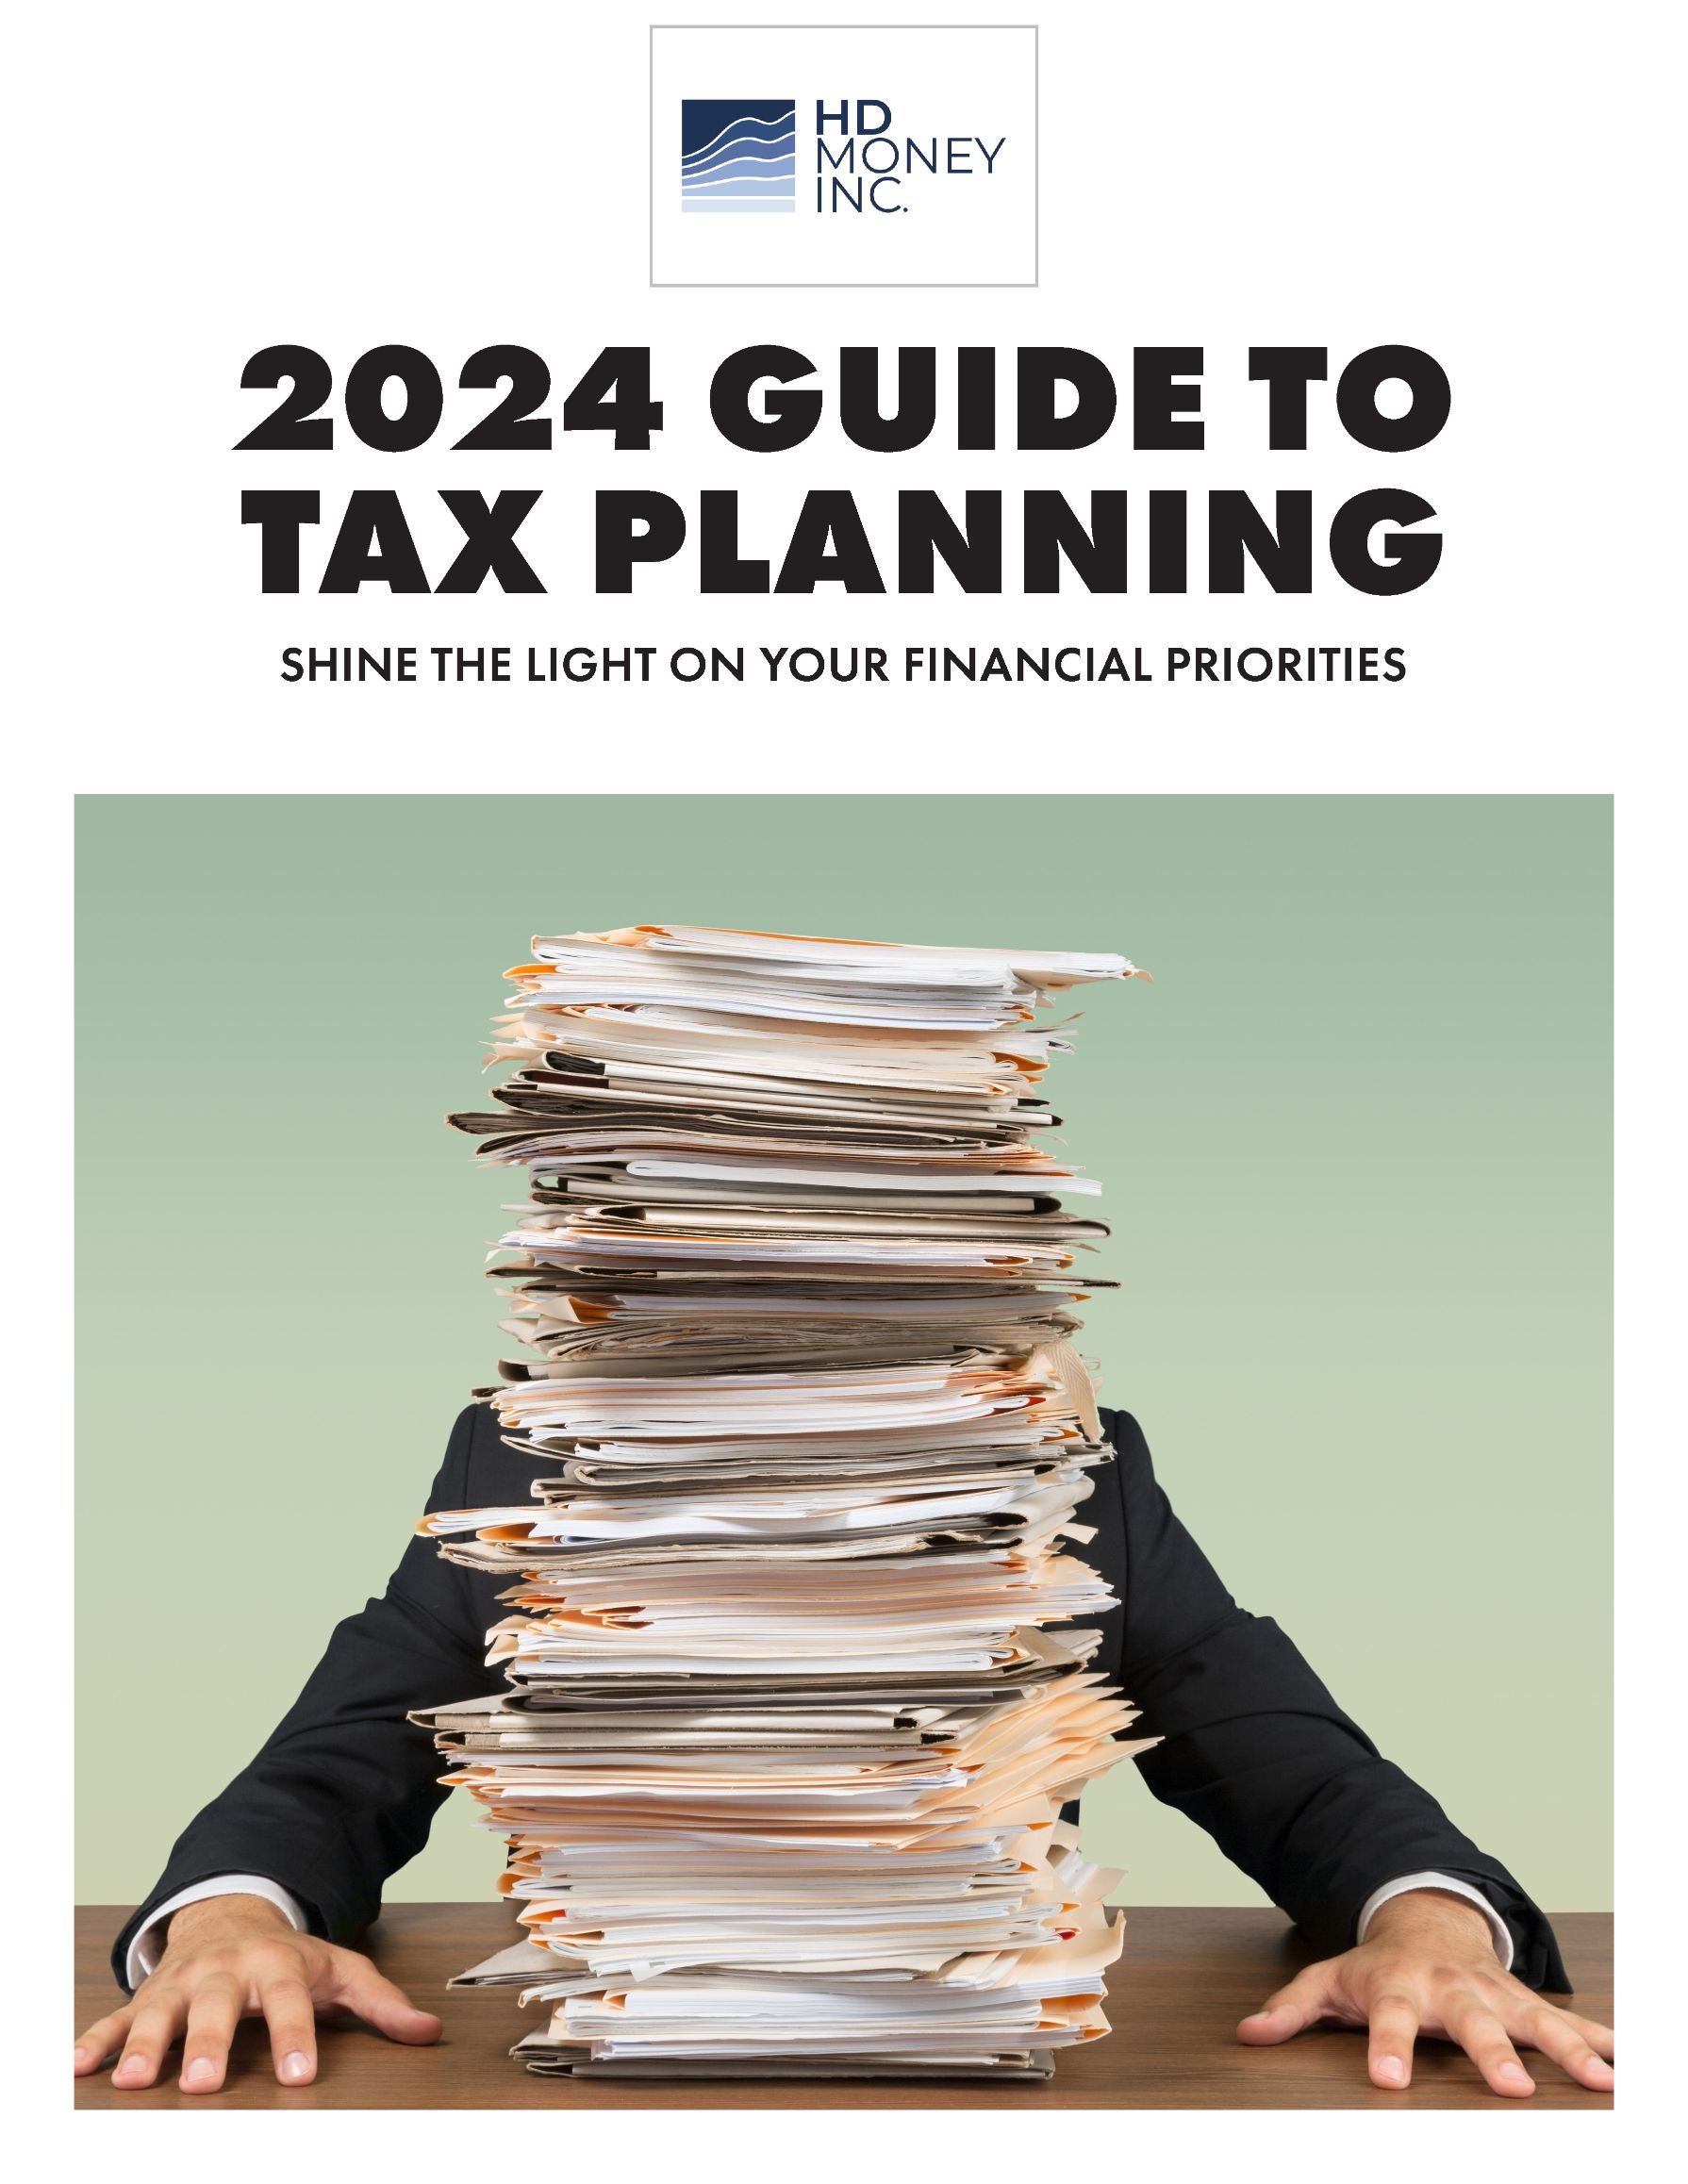 2024 Guide to Tax Planning